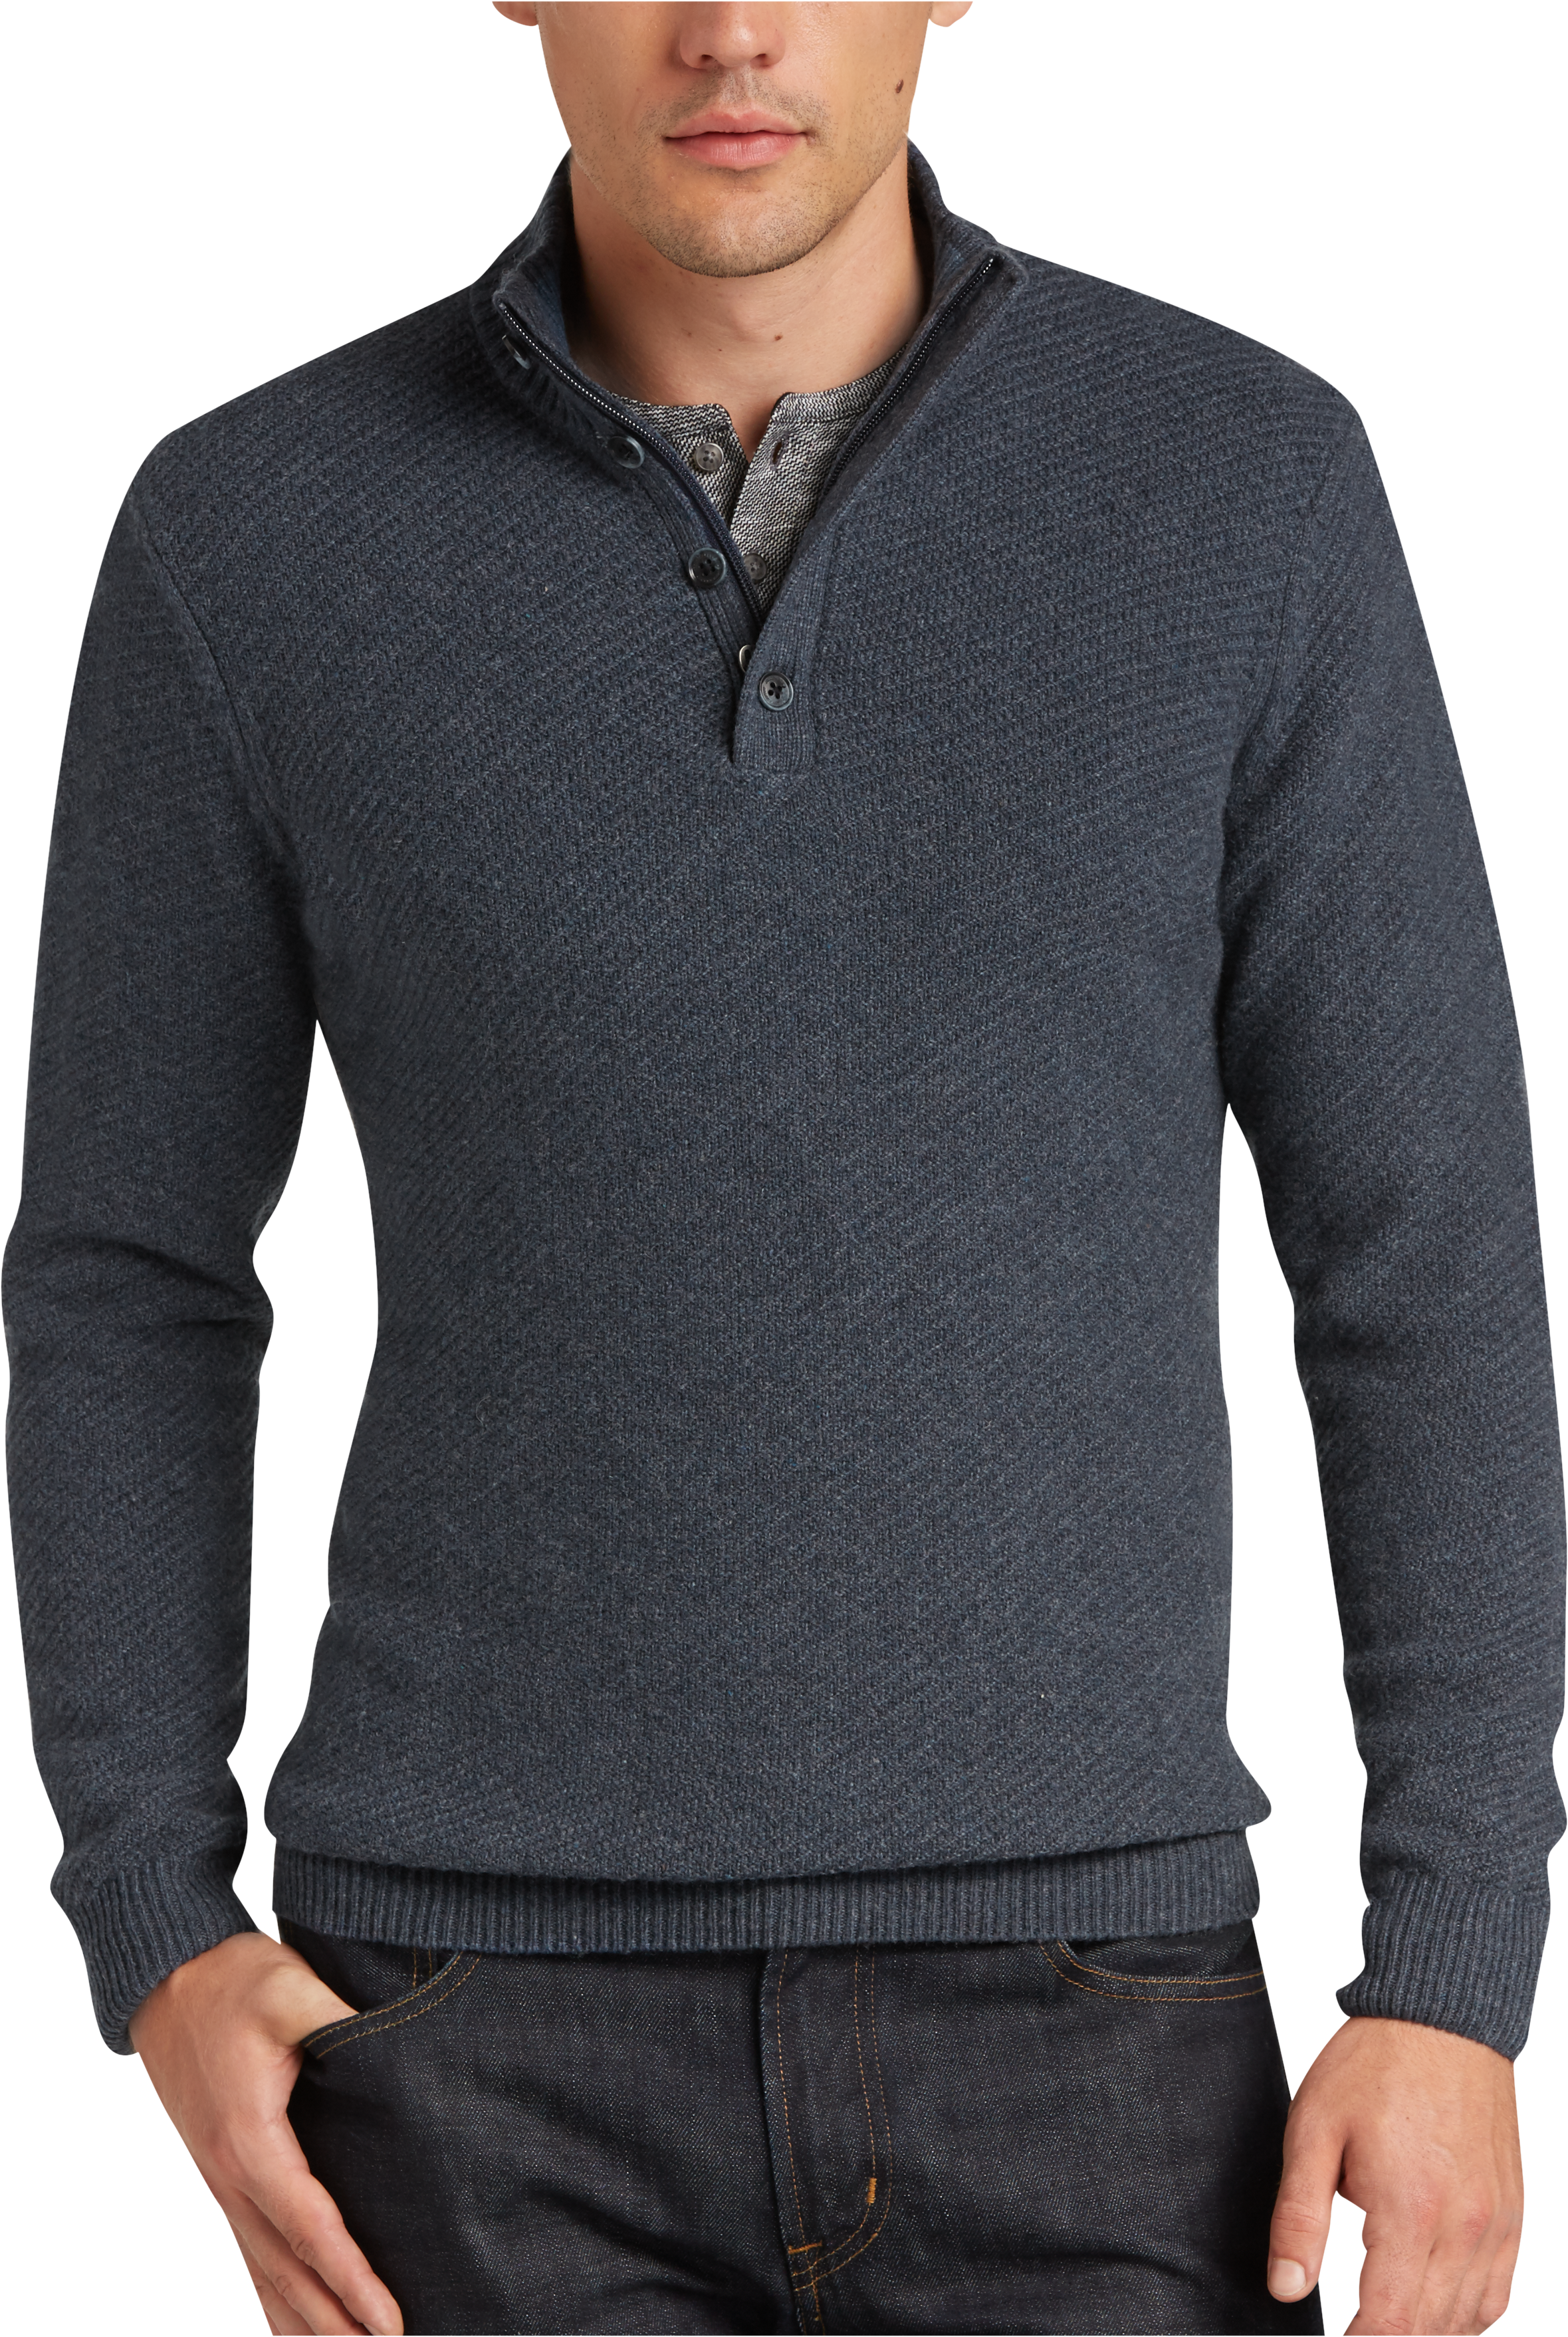 Sweaters - Clothing | Men's Wearhouse